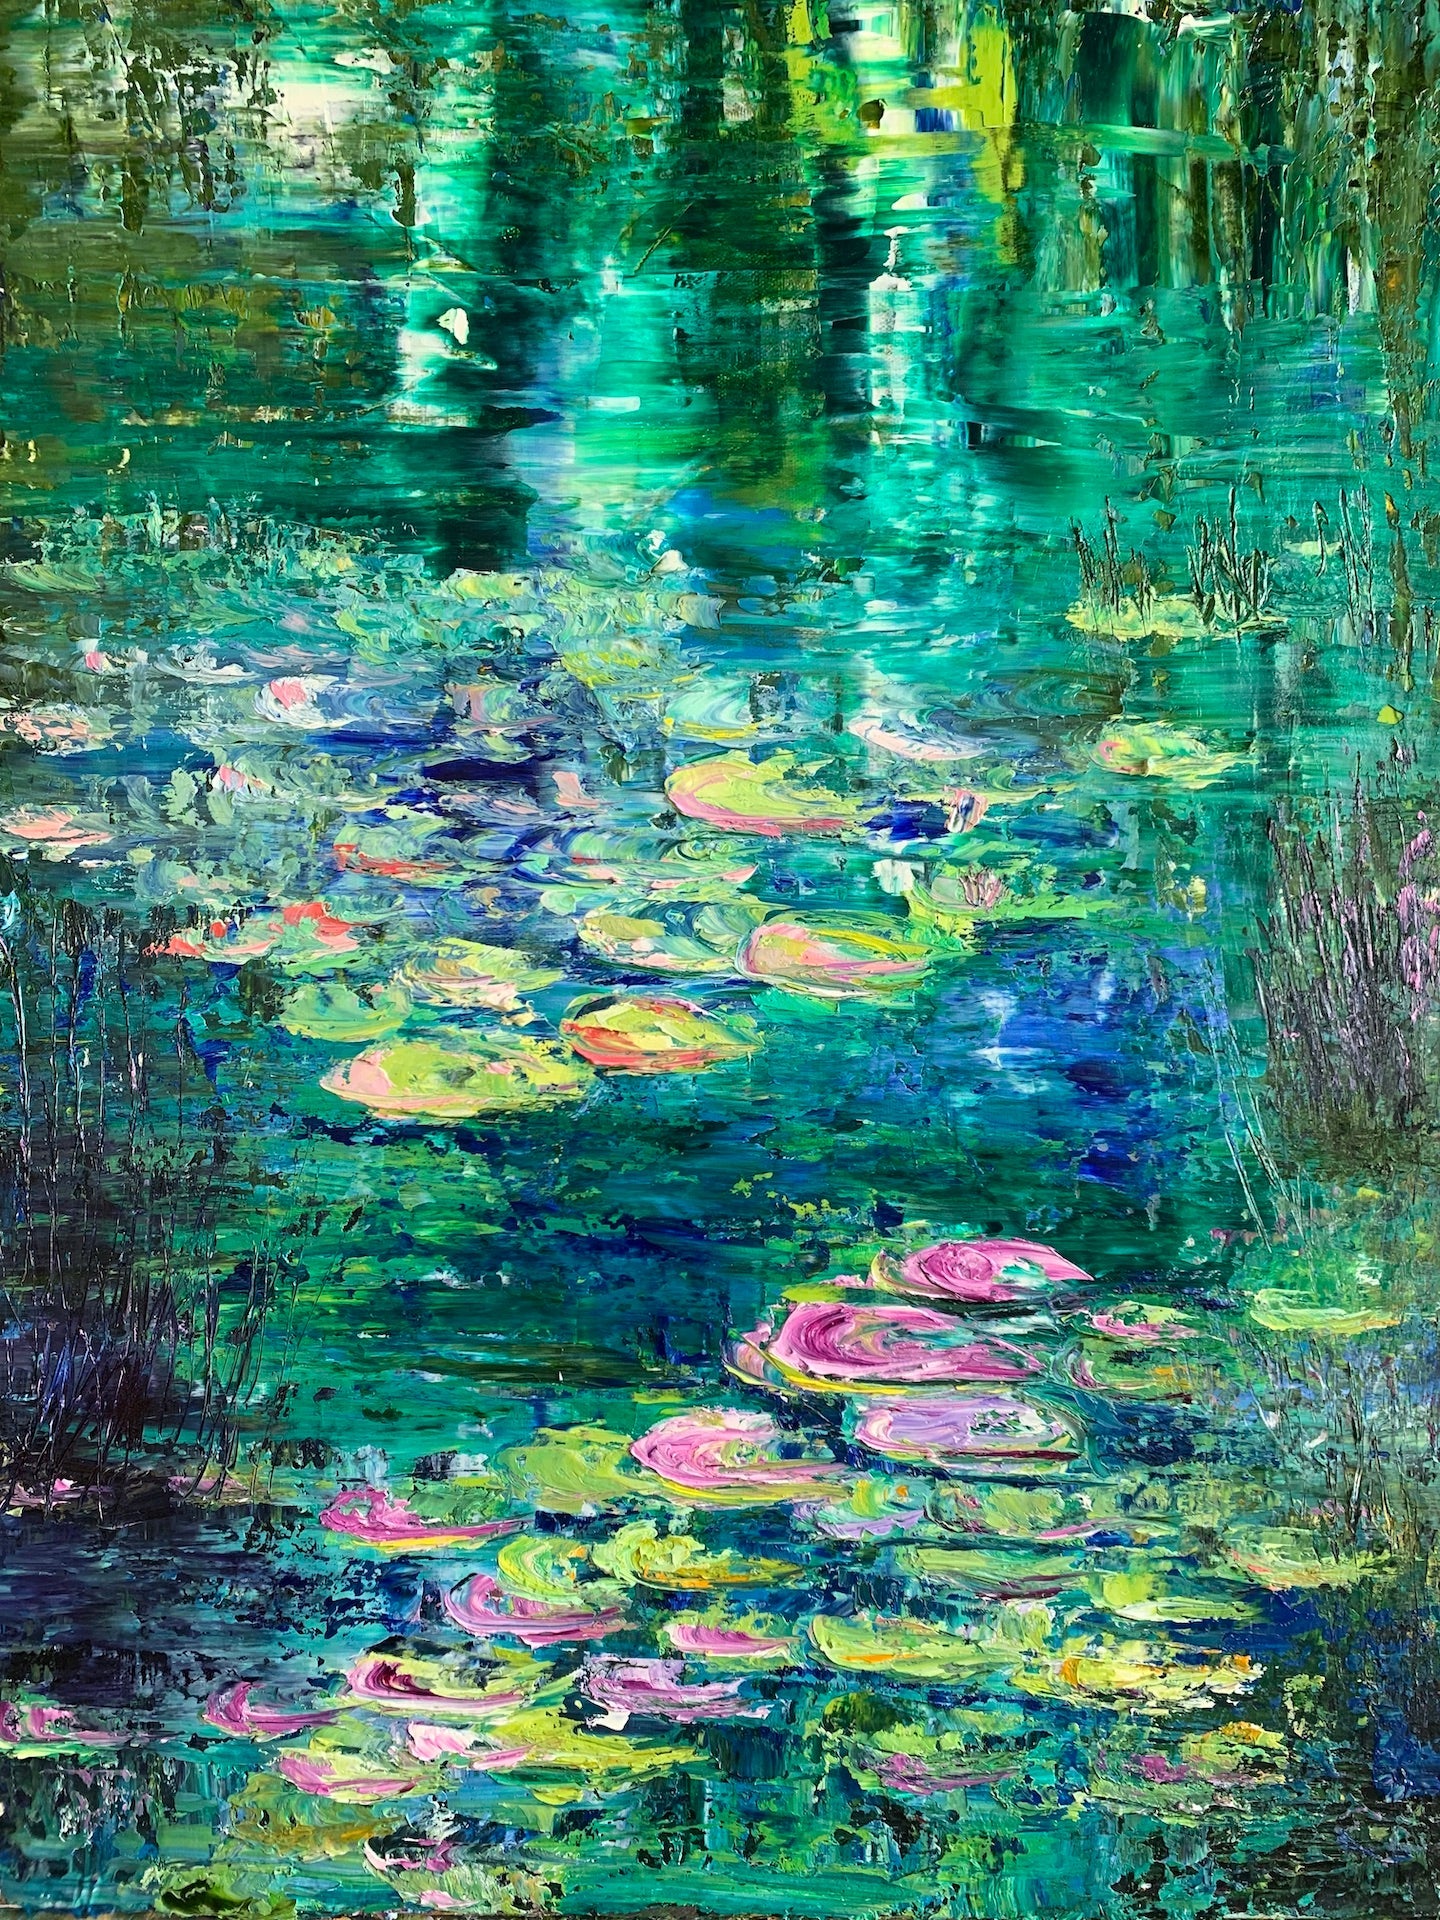 Giverny, OIL, 24" x 18"